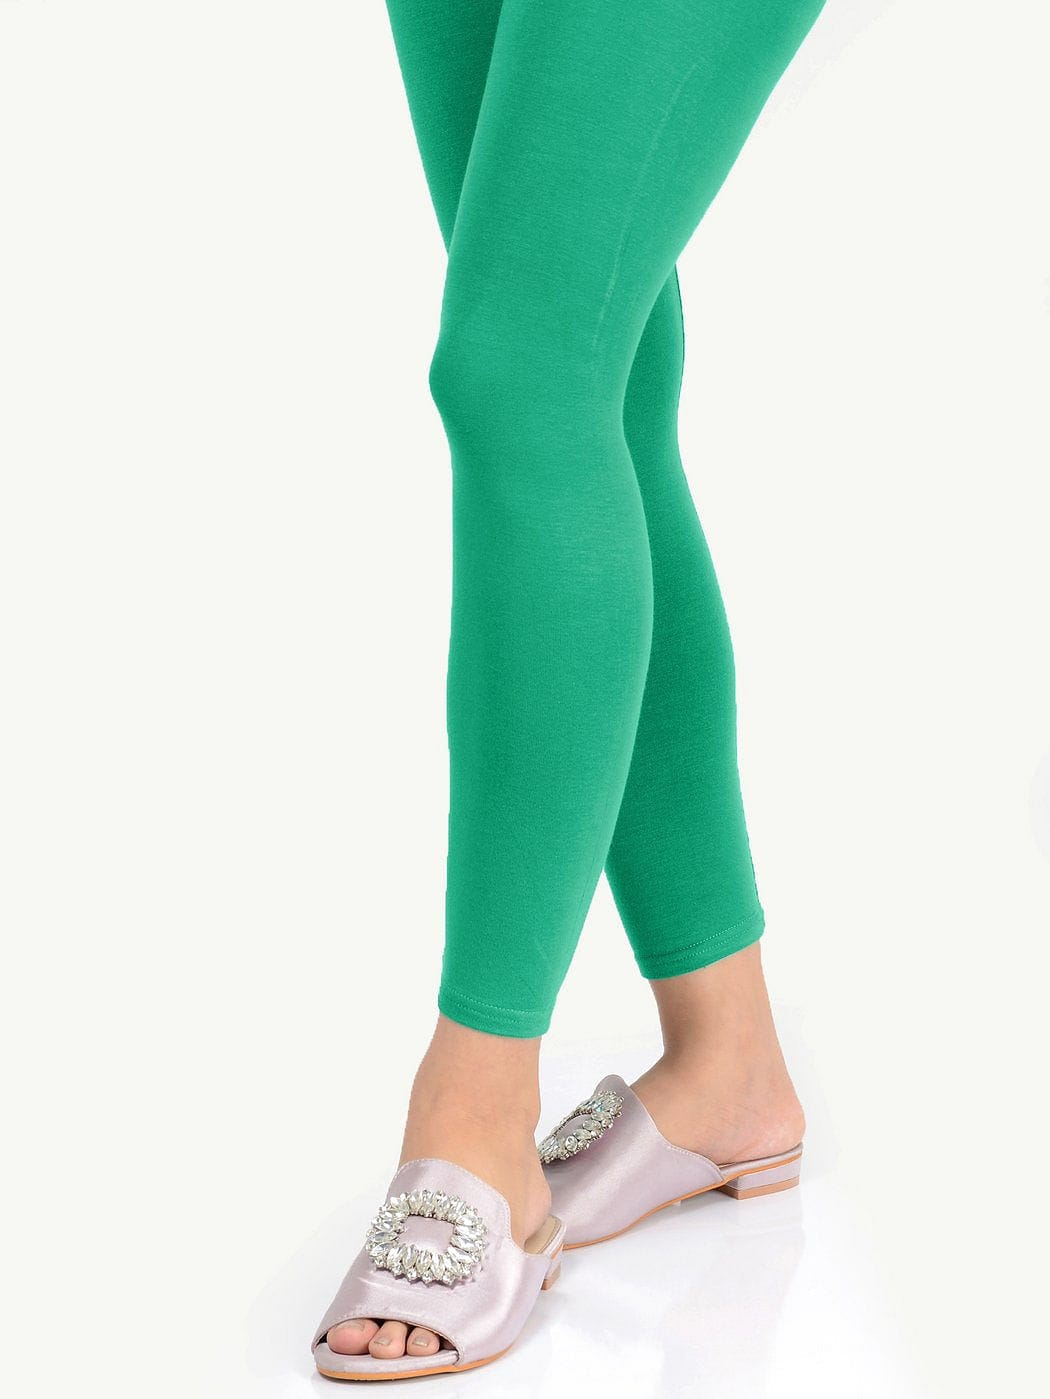 champion high waisted leggings  high waisted fishnets  thick workout leggings  kohls tights  green pantyhose  cotton tights womens  adida leggings  clear tights  plus size mermaid leggings - 